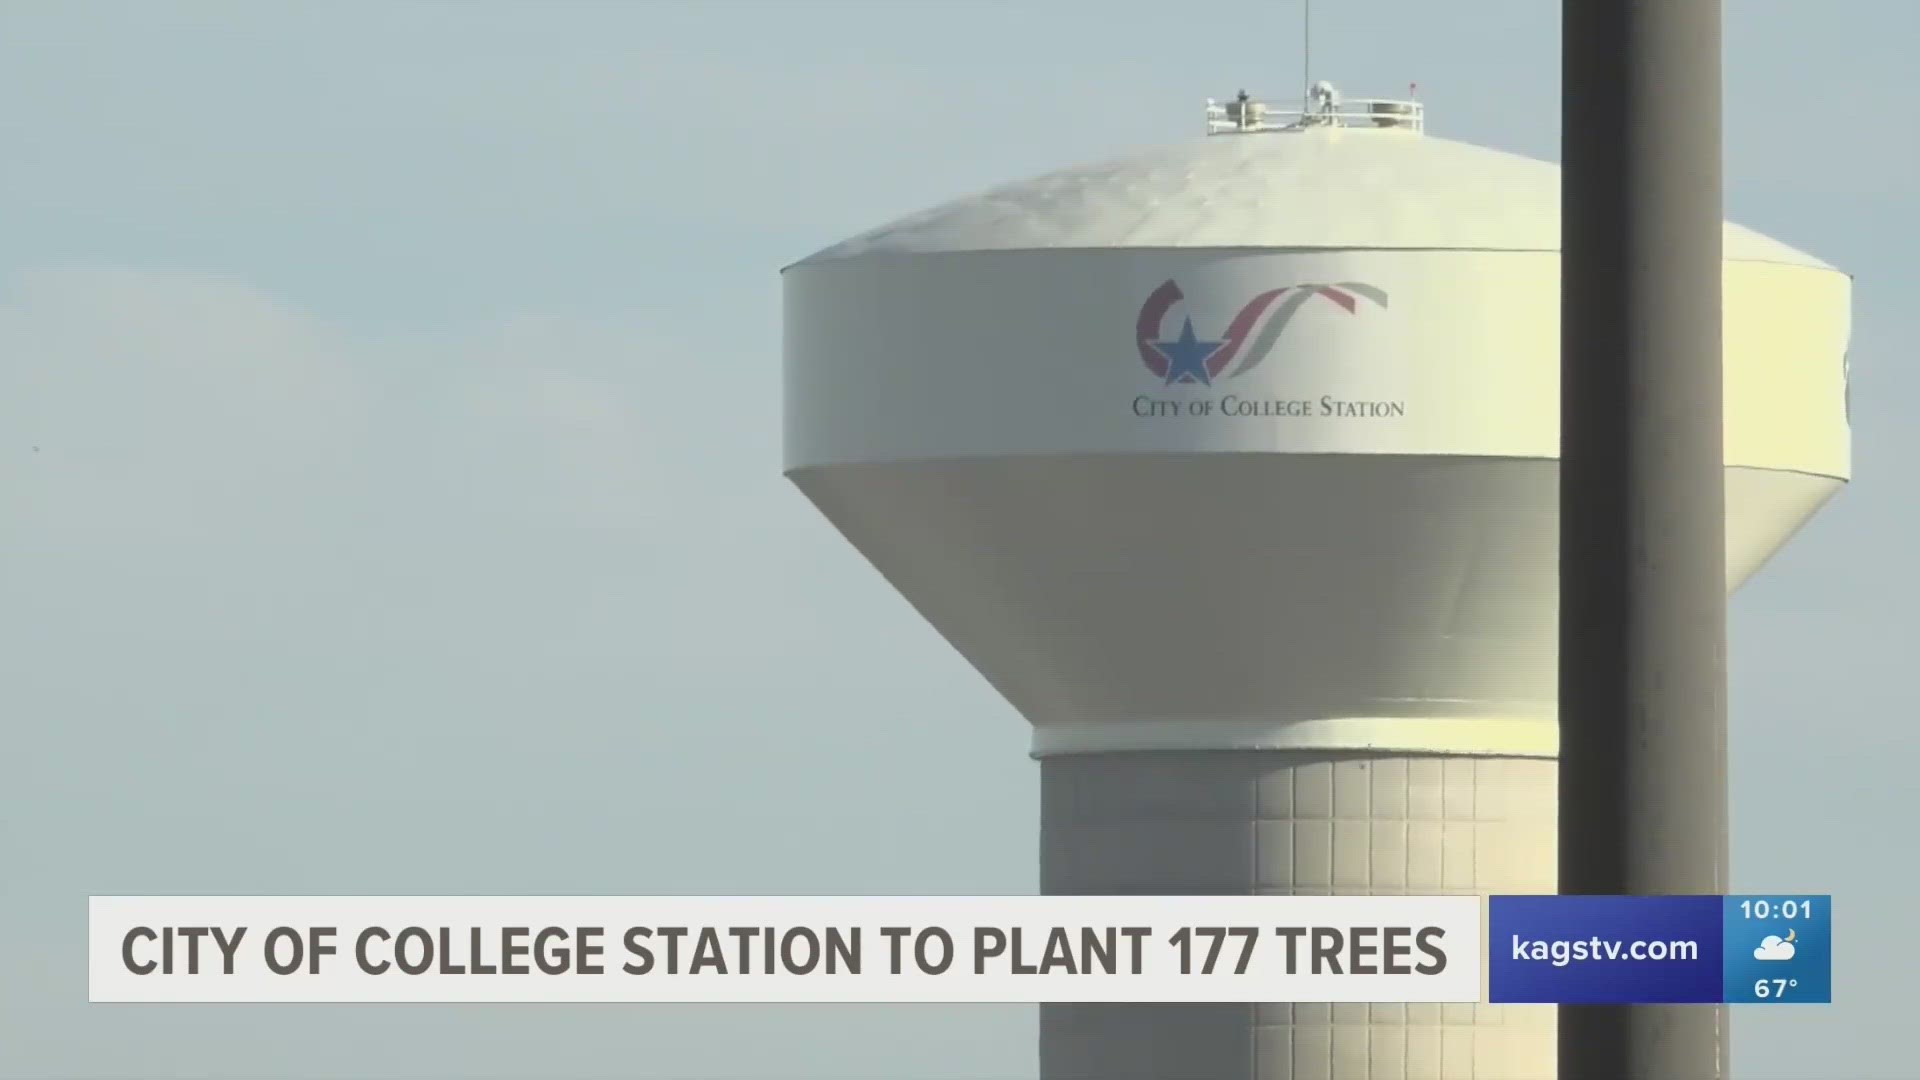 The movement is a part of the city's five-year plan to help reduce the effects of concrete heat throughout College Station.